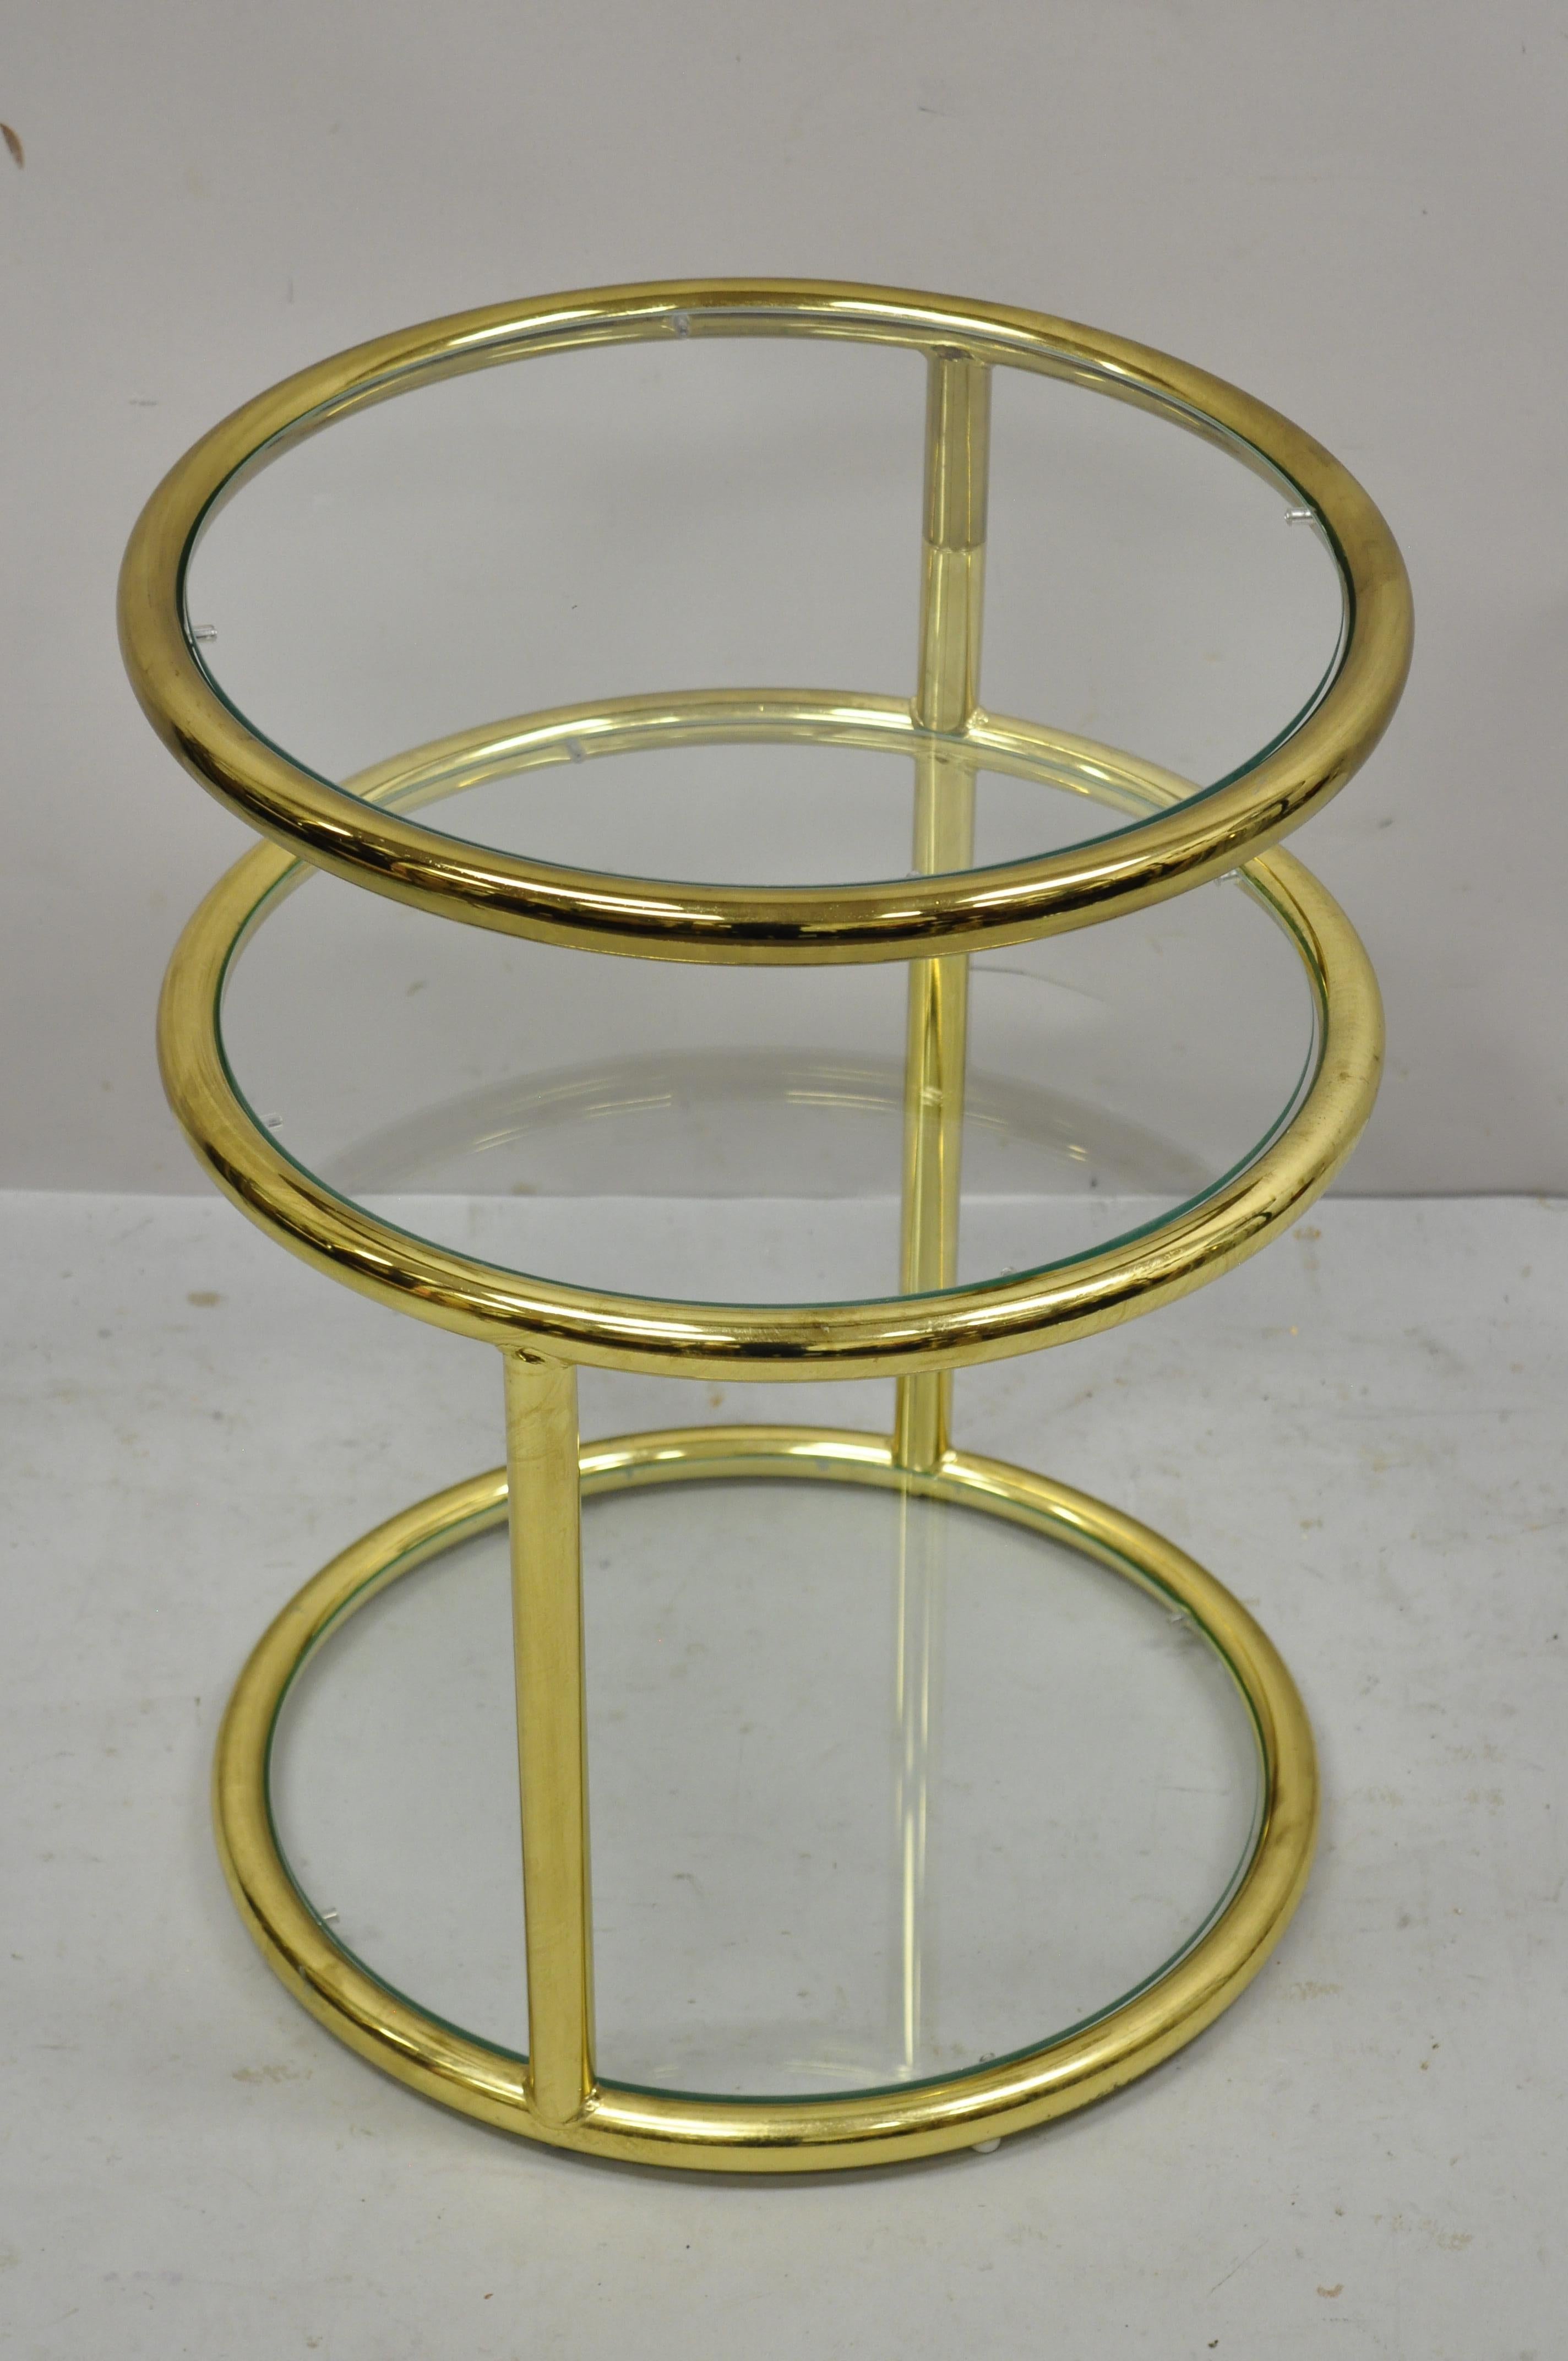 Mid-Century Modern brass frame 3 tier swivel Milo Baughman style round side table. Item features swivel top, 3 round glass tiers, brass plated frame, clean modernist lines, great style and form. Circa 1970s. Measurements: 22.5